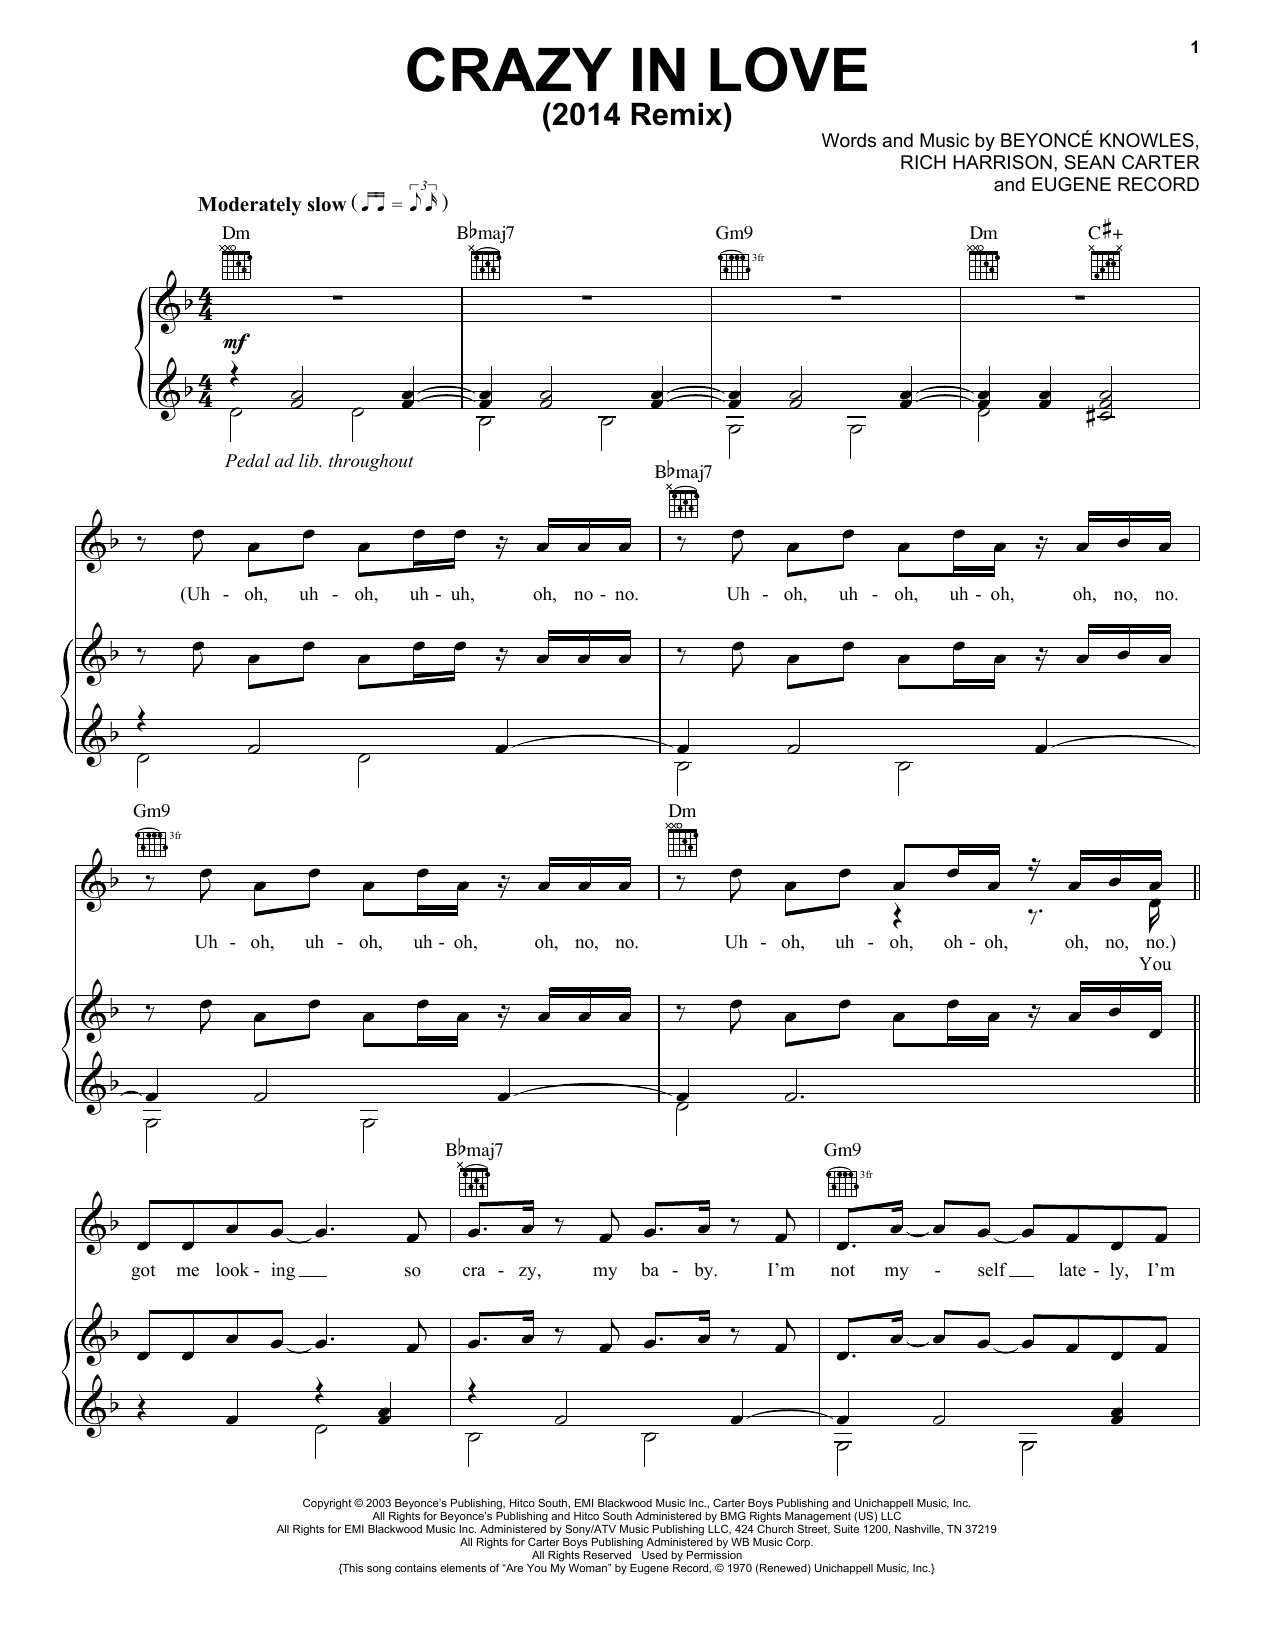 Beyonce featuring Jay-Z Crazy In Love sheet music notes and chords. Download Printable PDF.